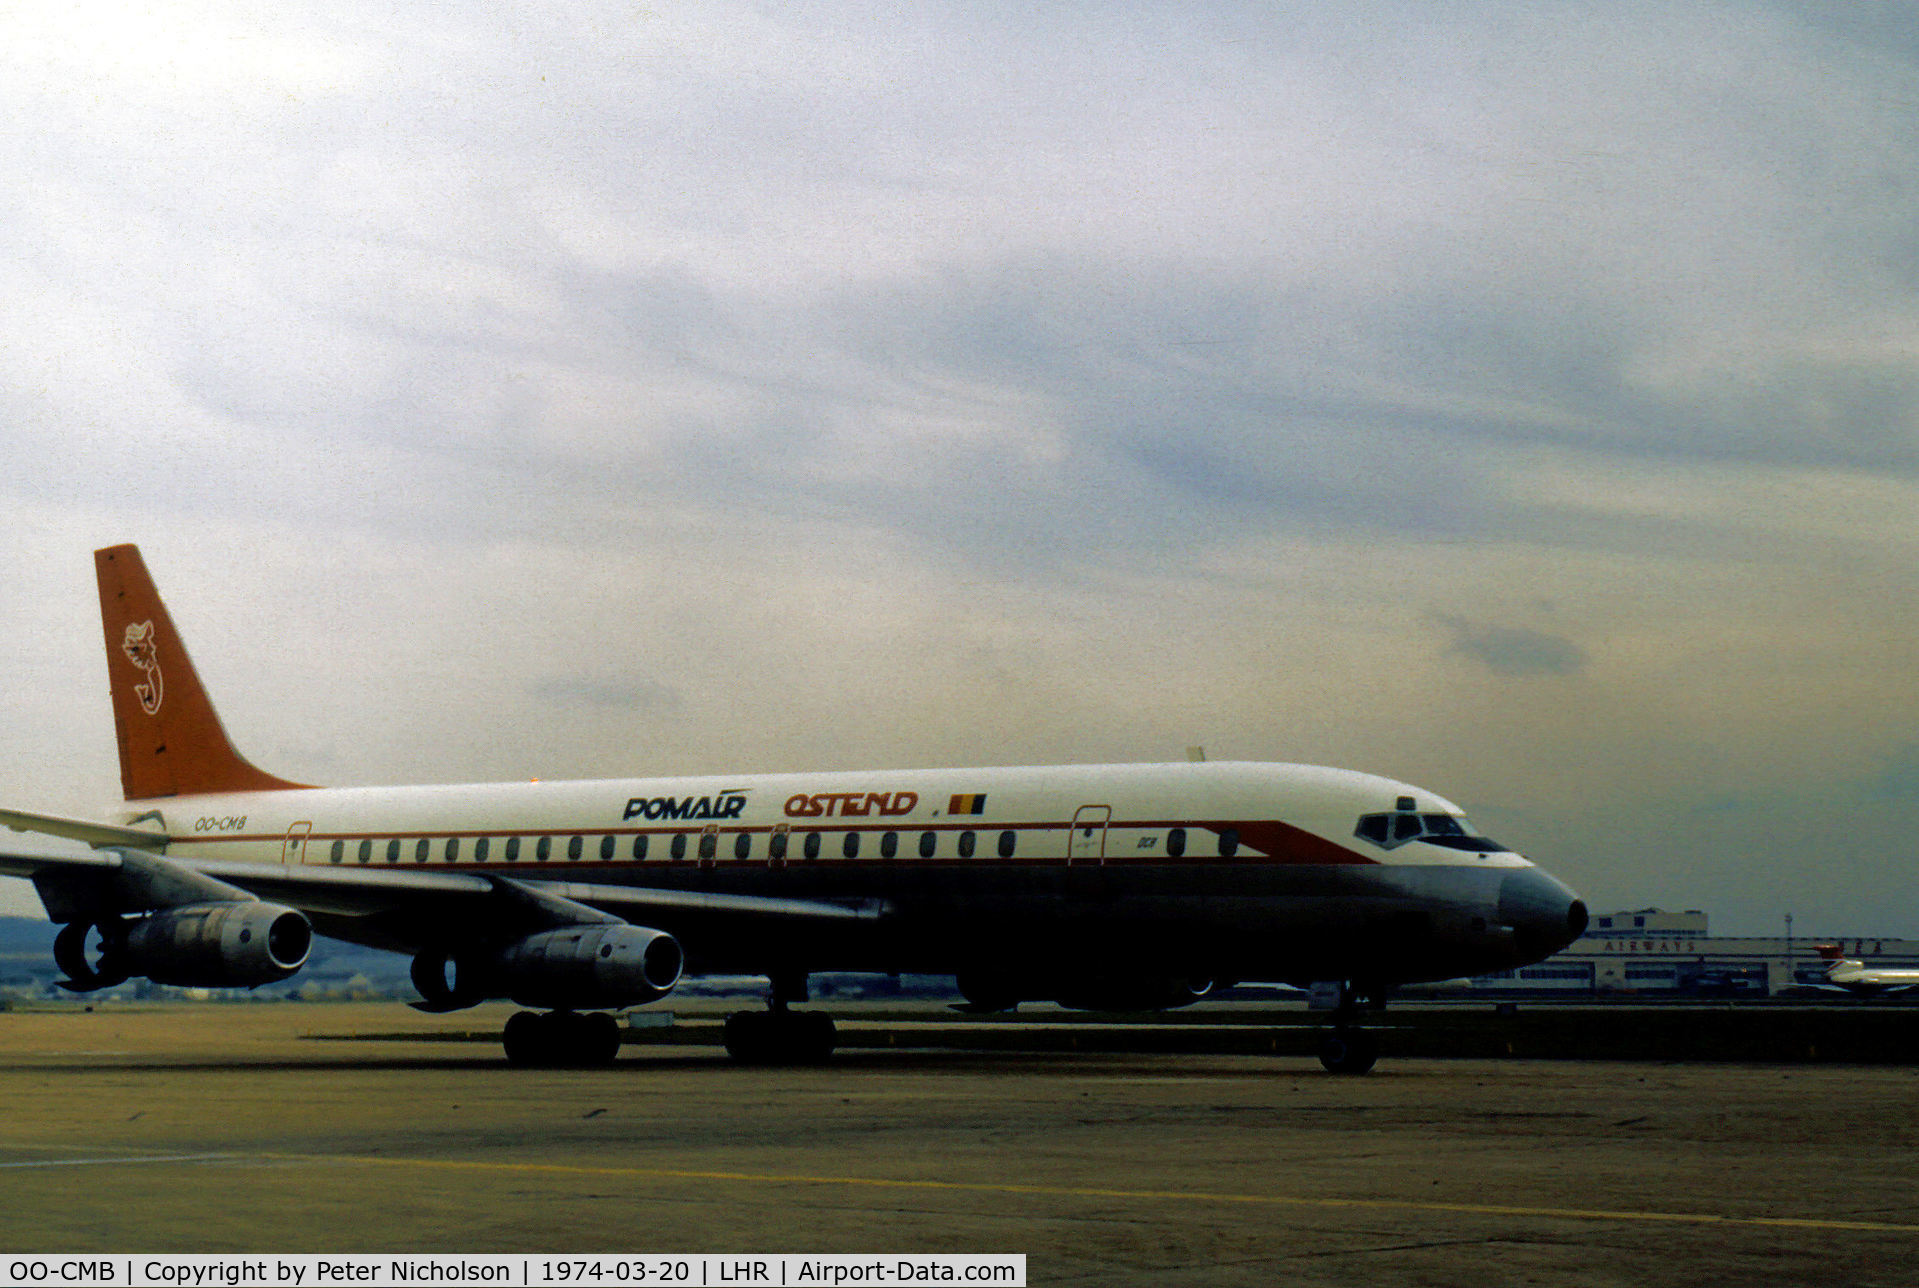 OO-CMB, 1960 Douglas DC-8-32 C/N 45382, DC-8-32 of Pomair taxying to the active runway at London Heathrow in March 1974.